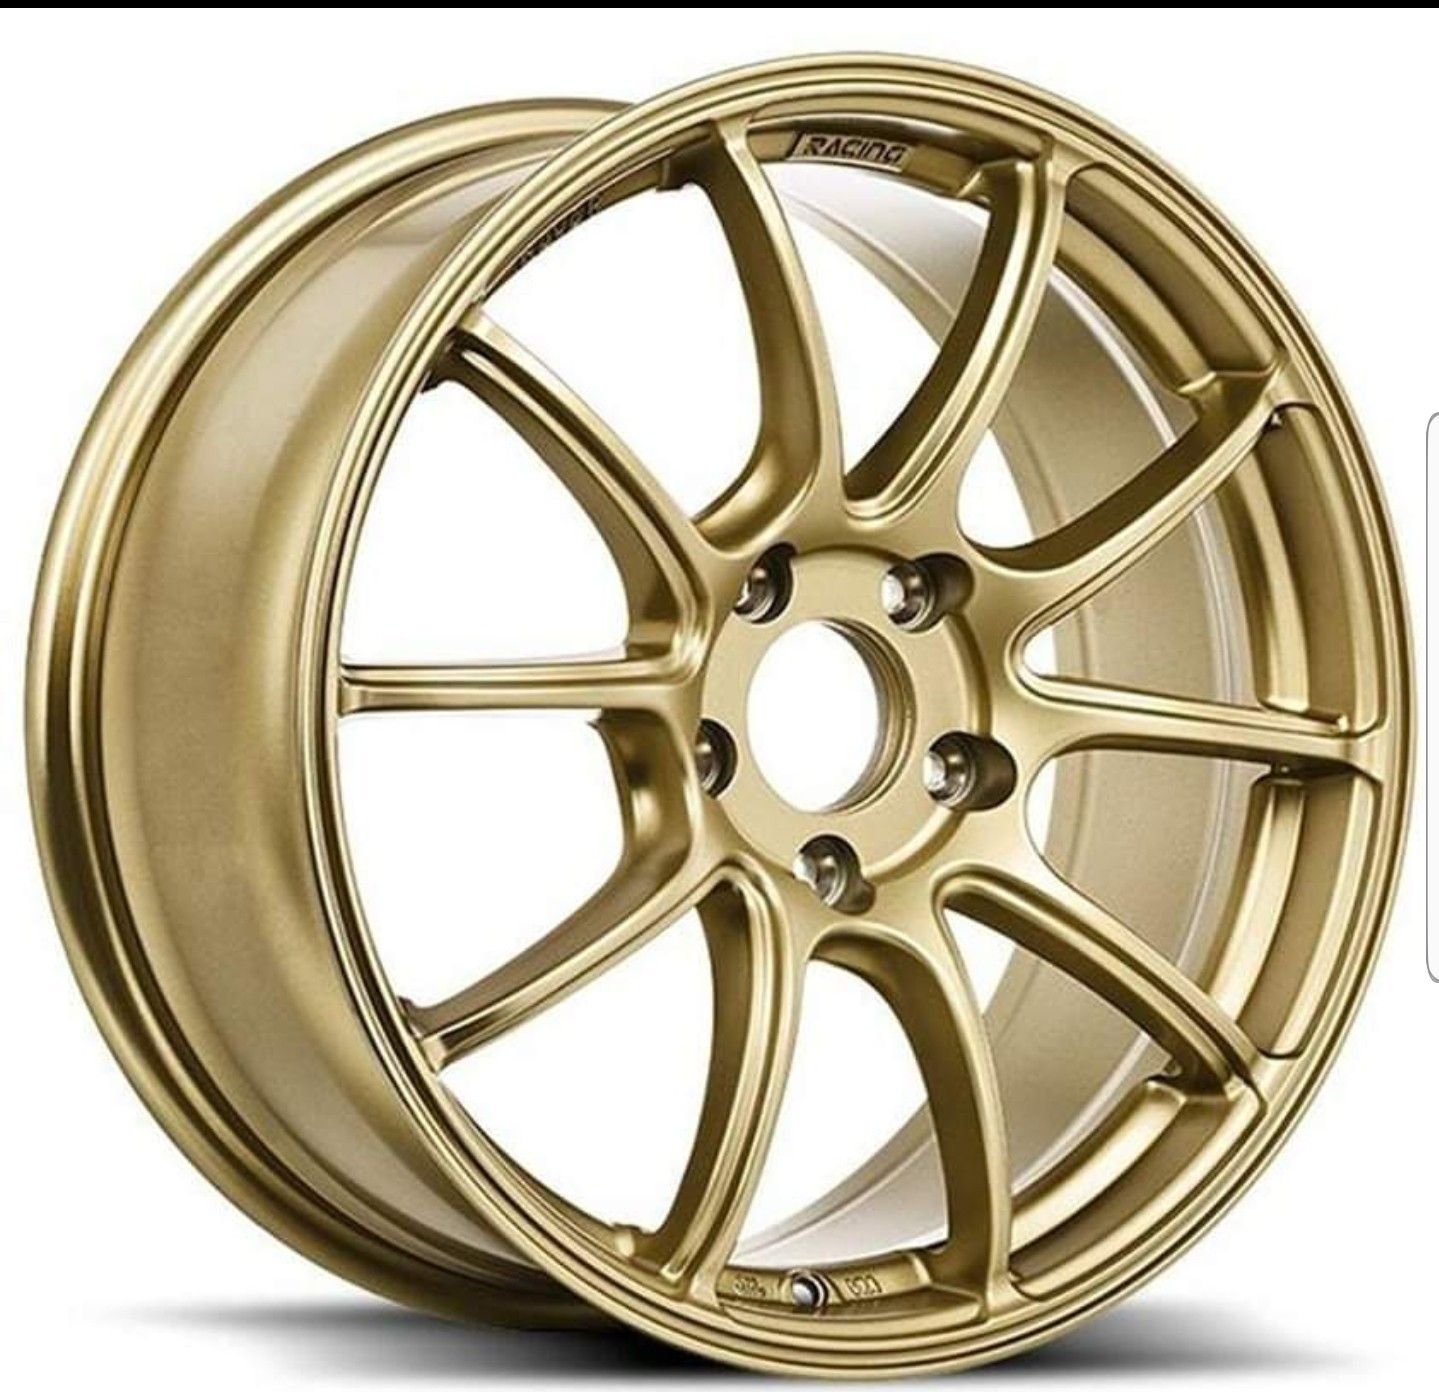 18" Bavar Racing BV02 Gold wheel rim & tire packages available! easy financing!